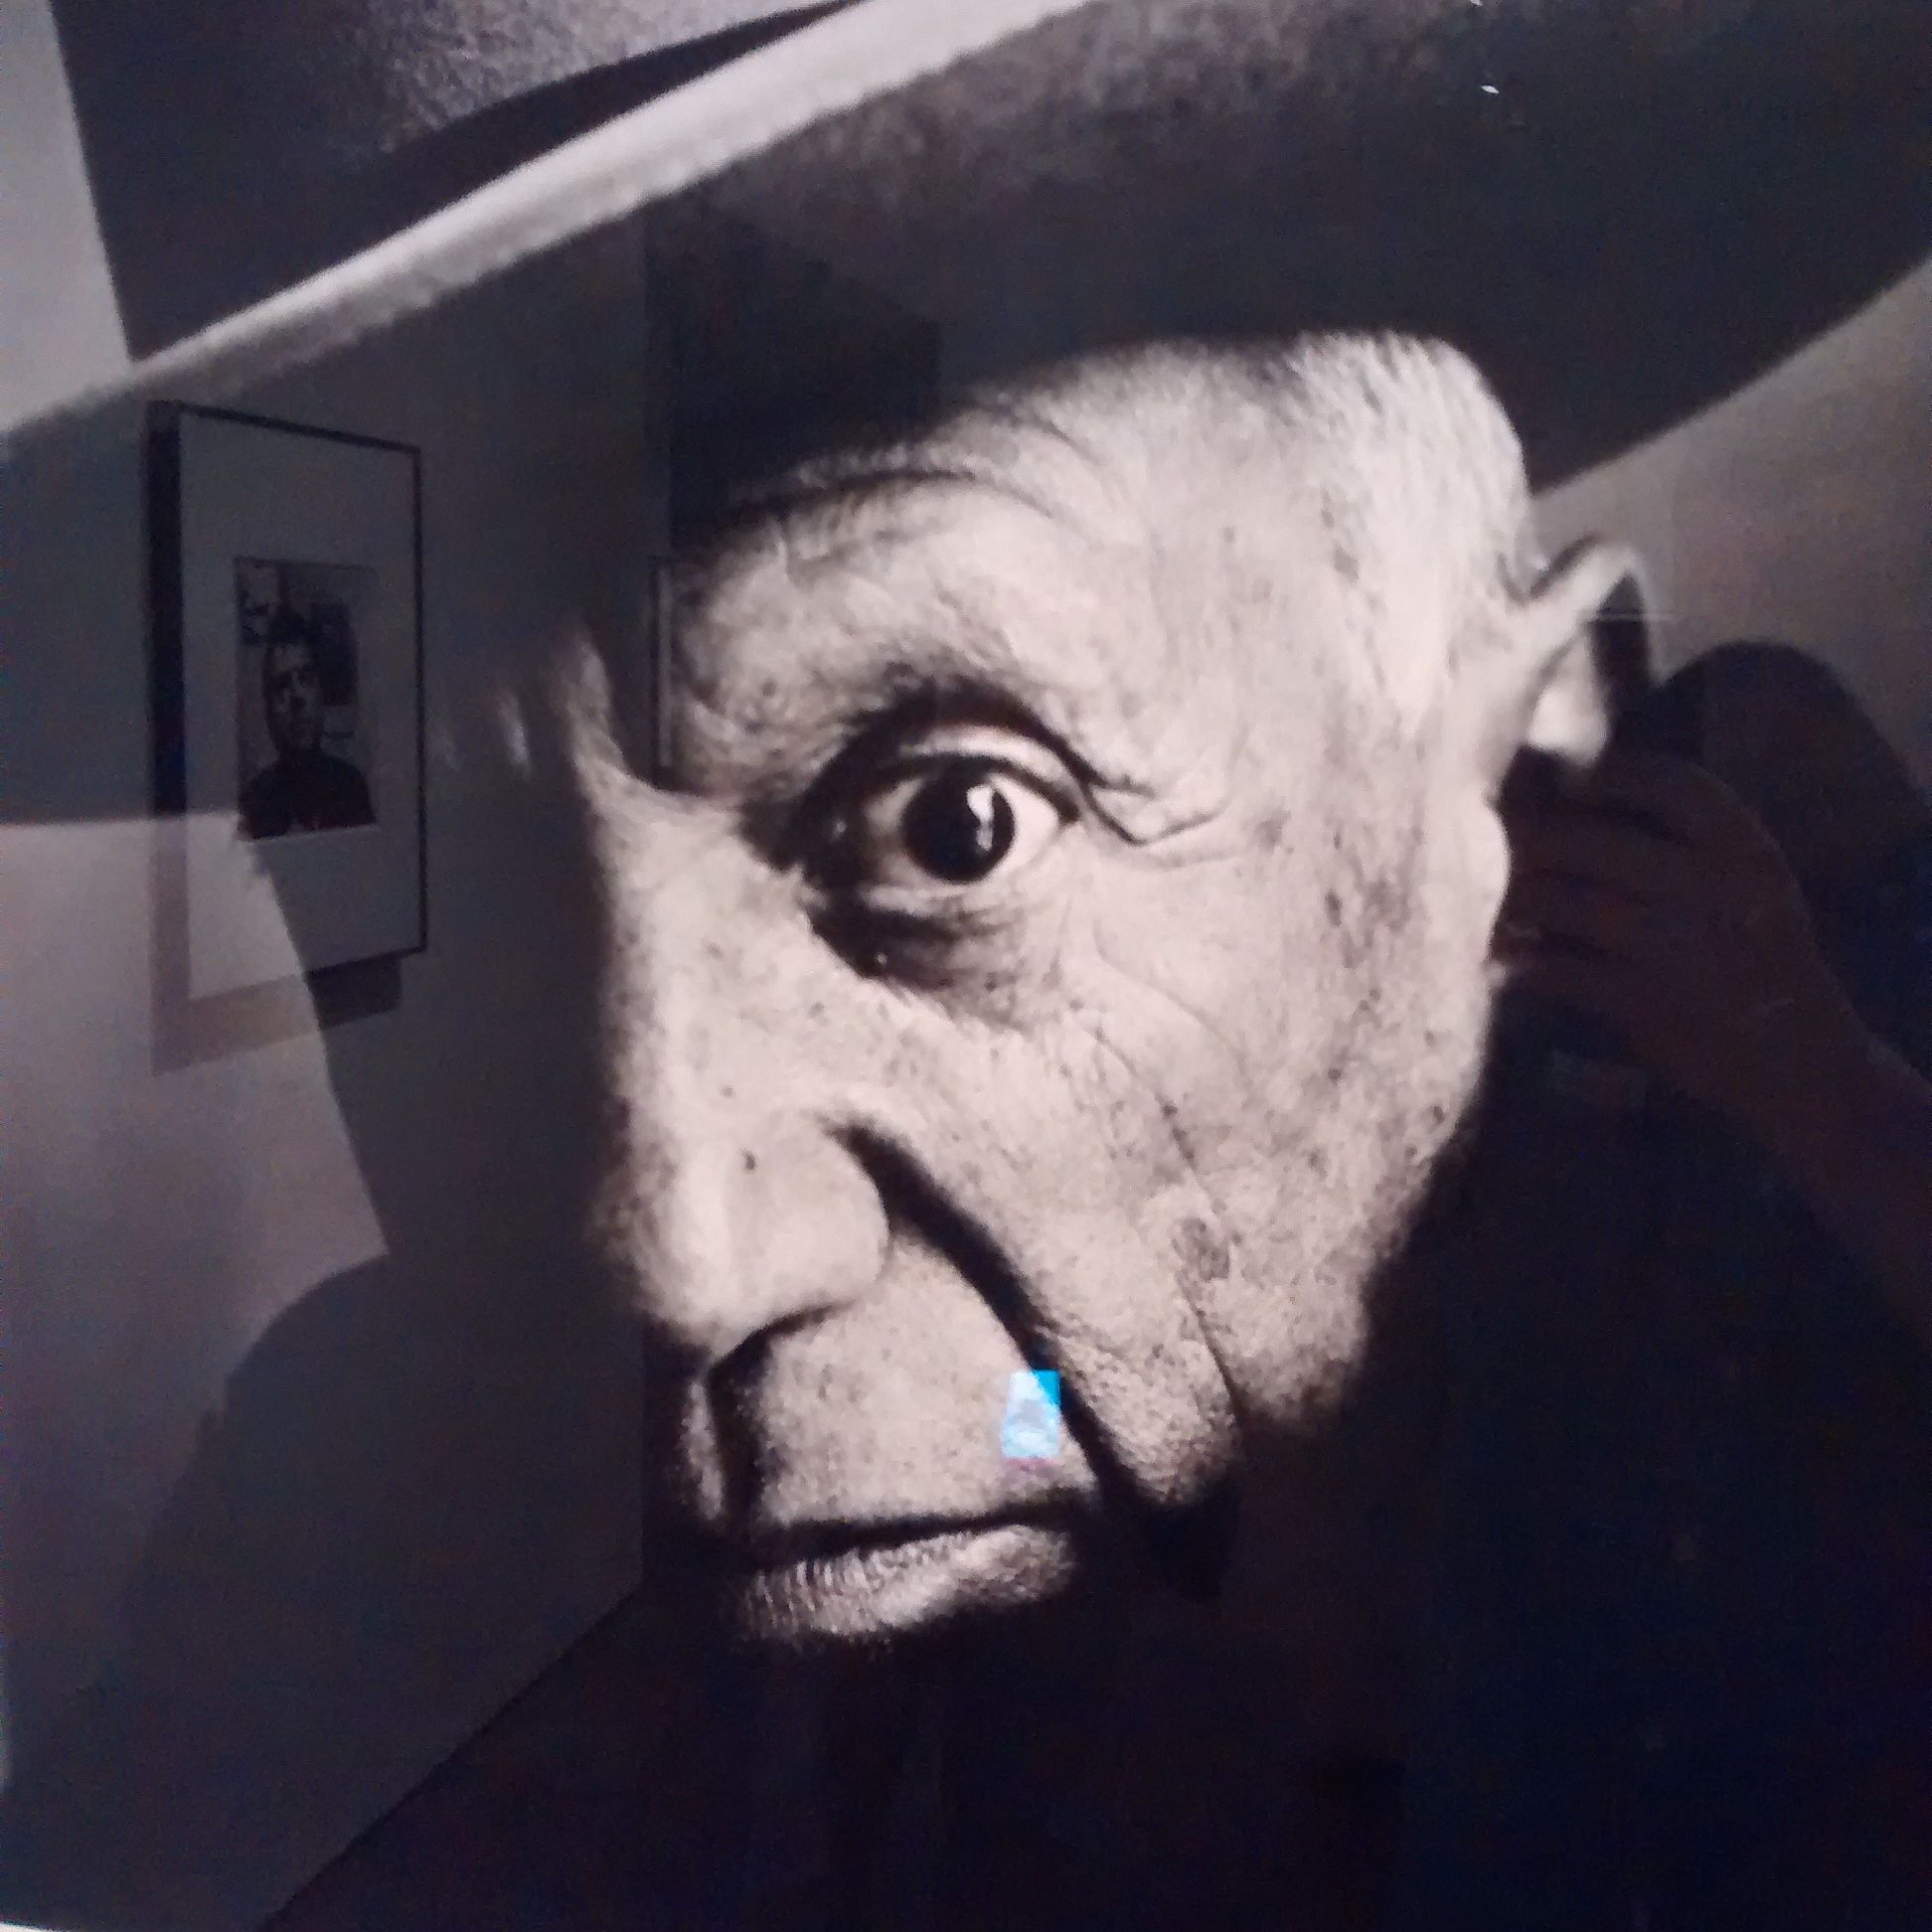 Pablo Picasso was a Spanish painter, sculptor, printmaker, ceramicist, stage designer, poet and playwright who spent most of his adult life in France.